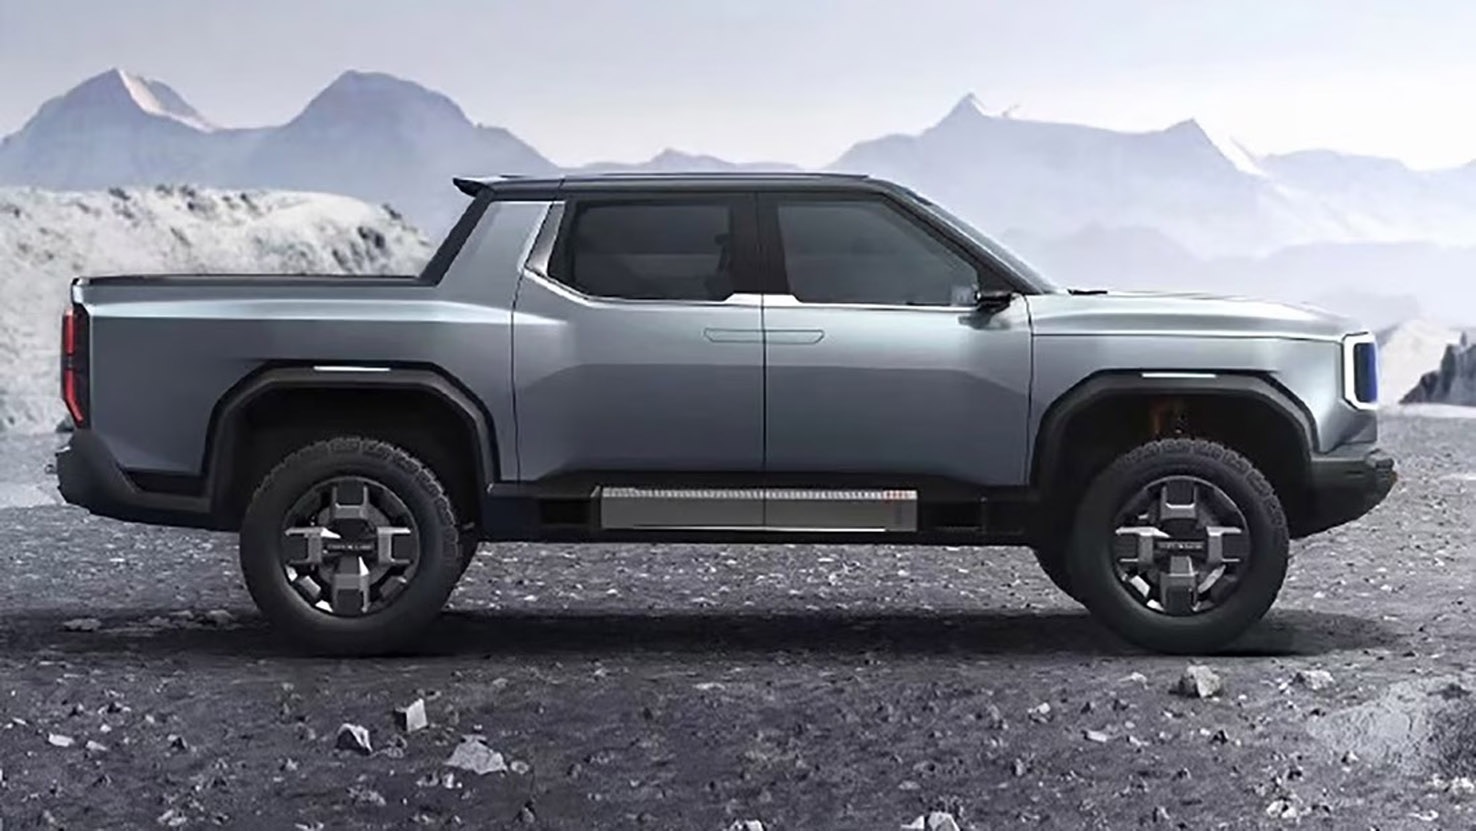 This new Chinese ute could be a threat to the Toyota HiLux - Torquecafe.com